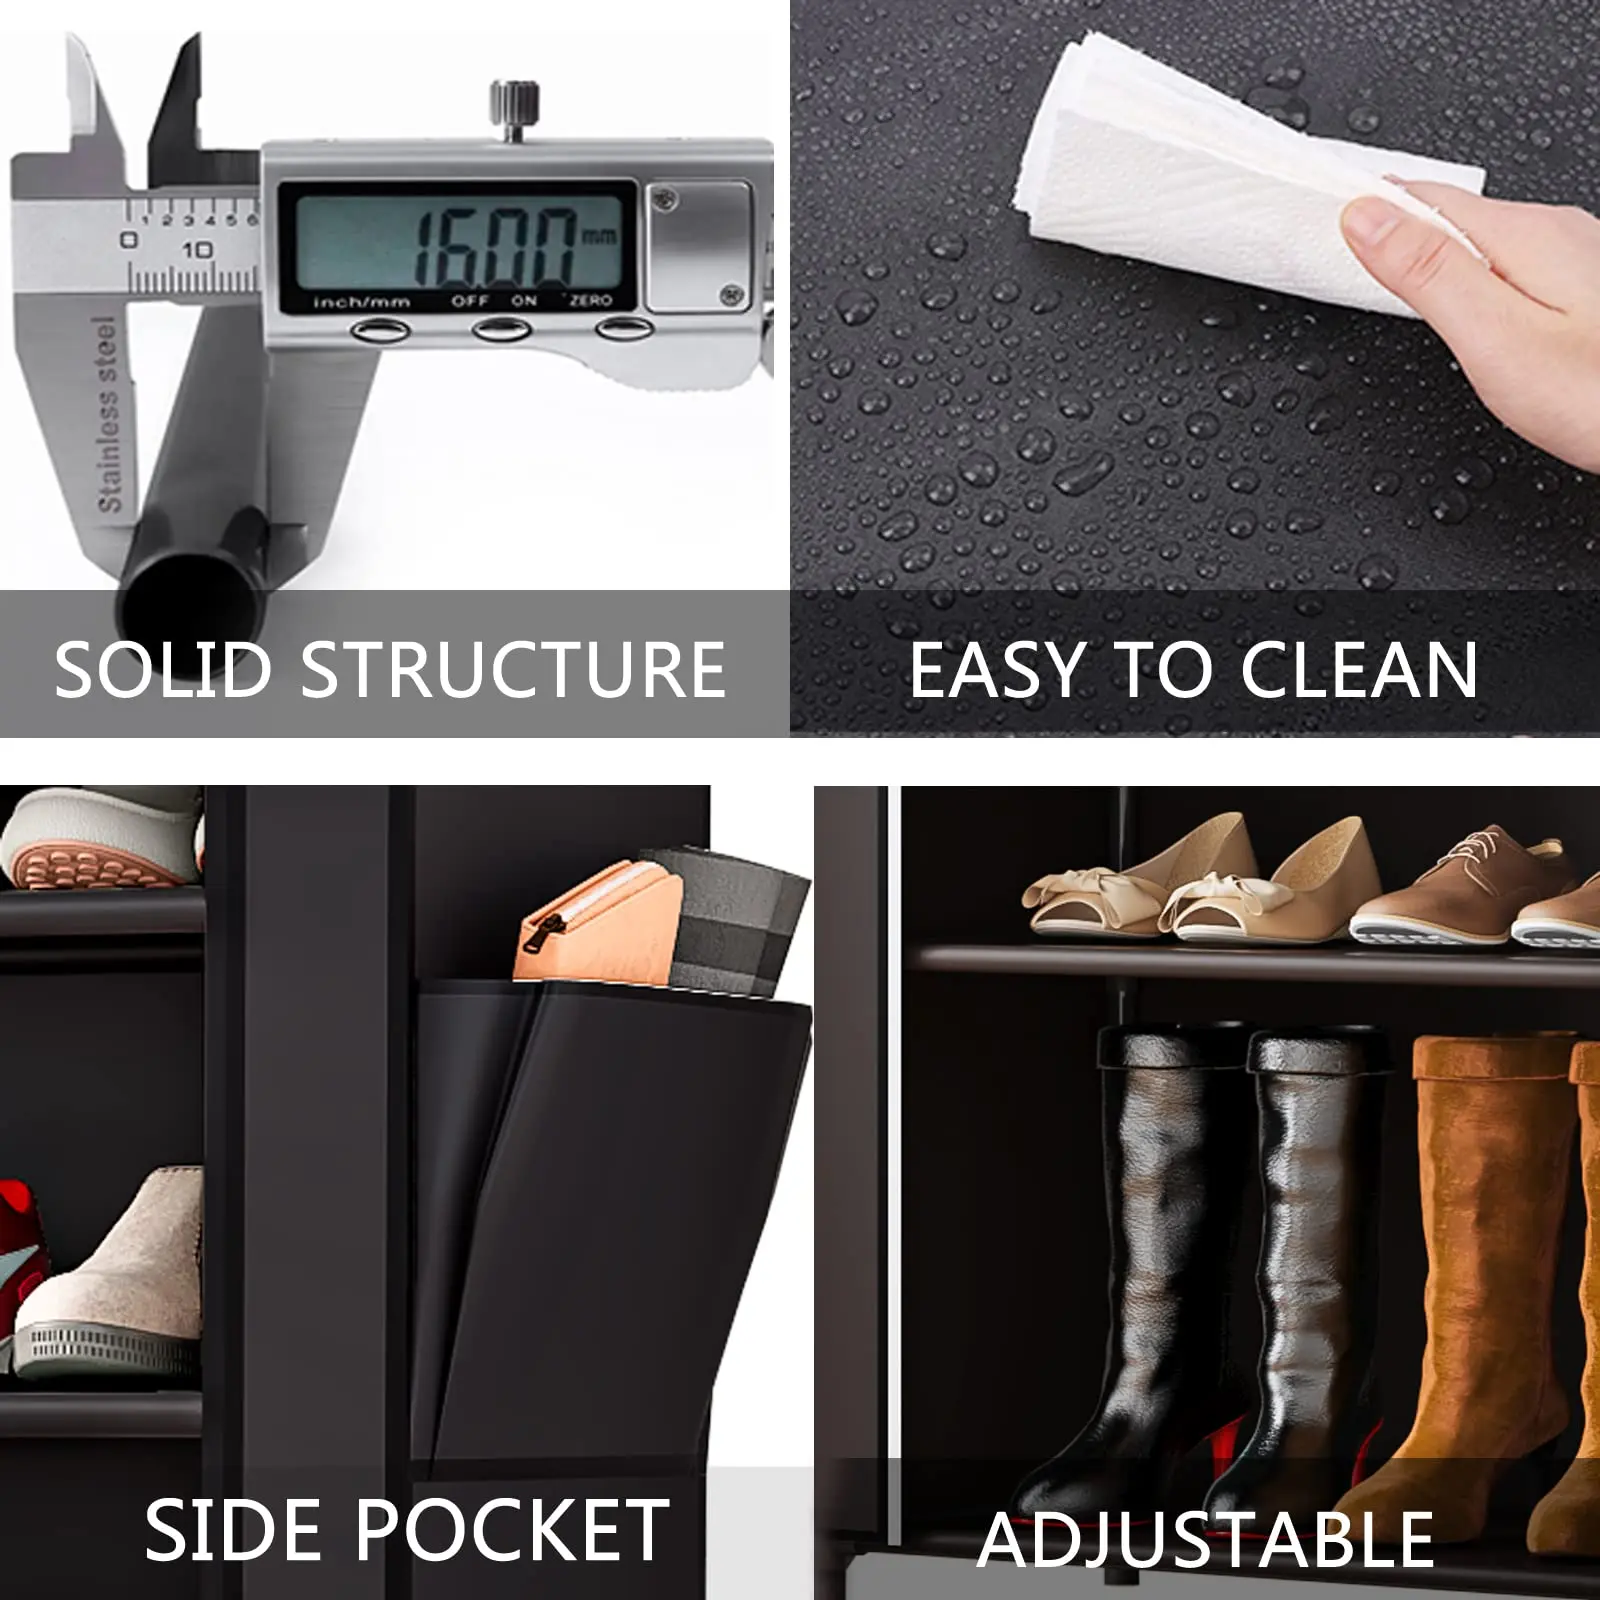 🎉Clearance only $19.98🎉Shoe Rack Portable Storage Free Standing Shoe 18